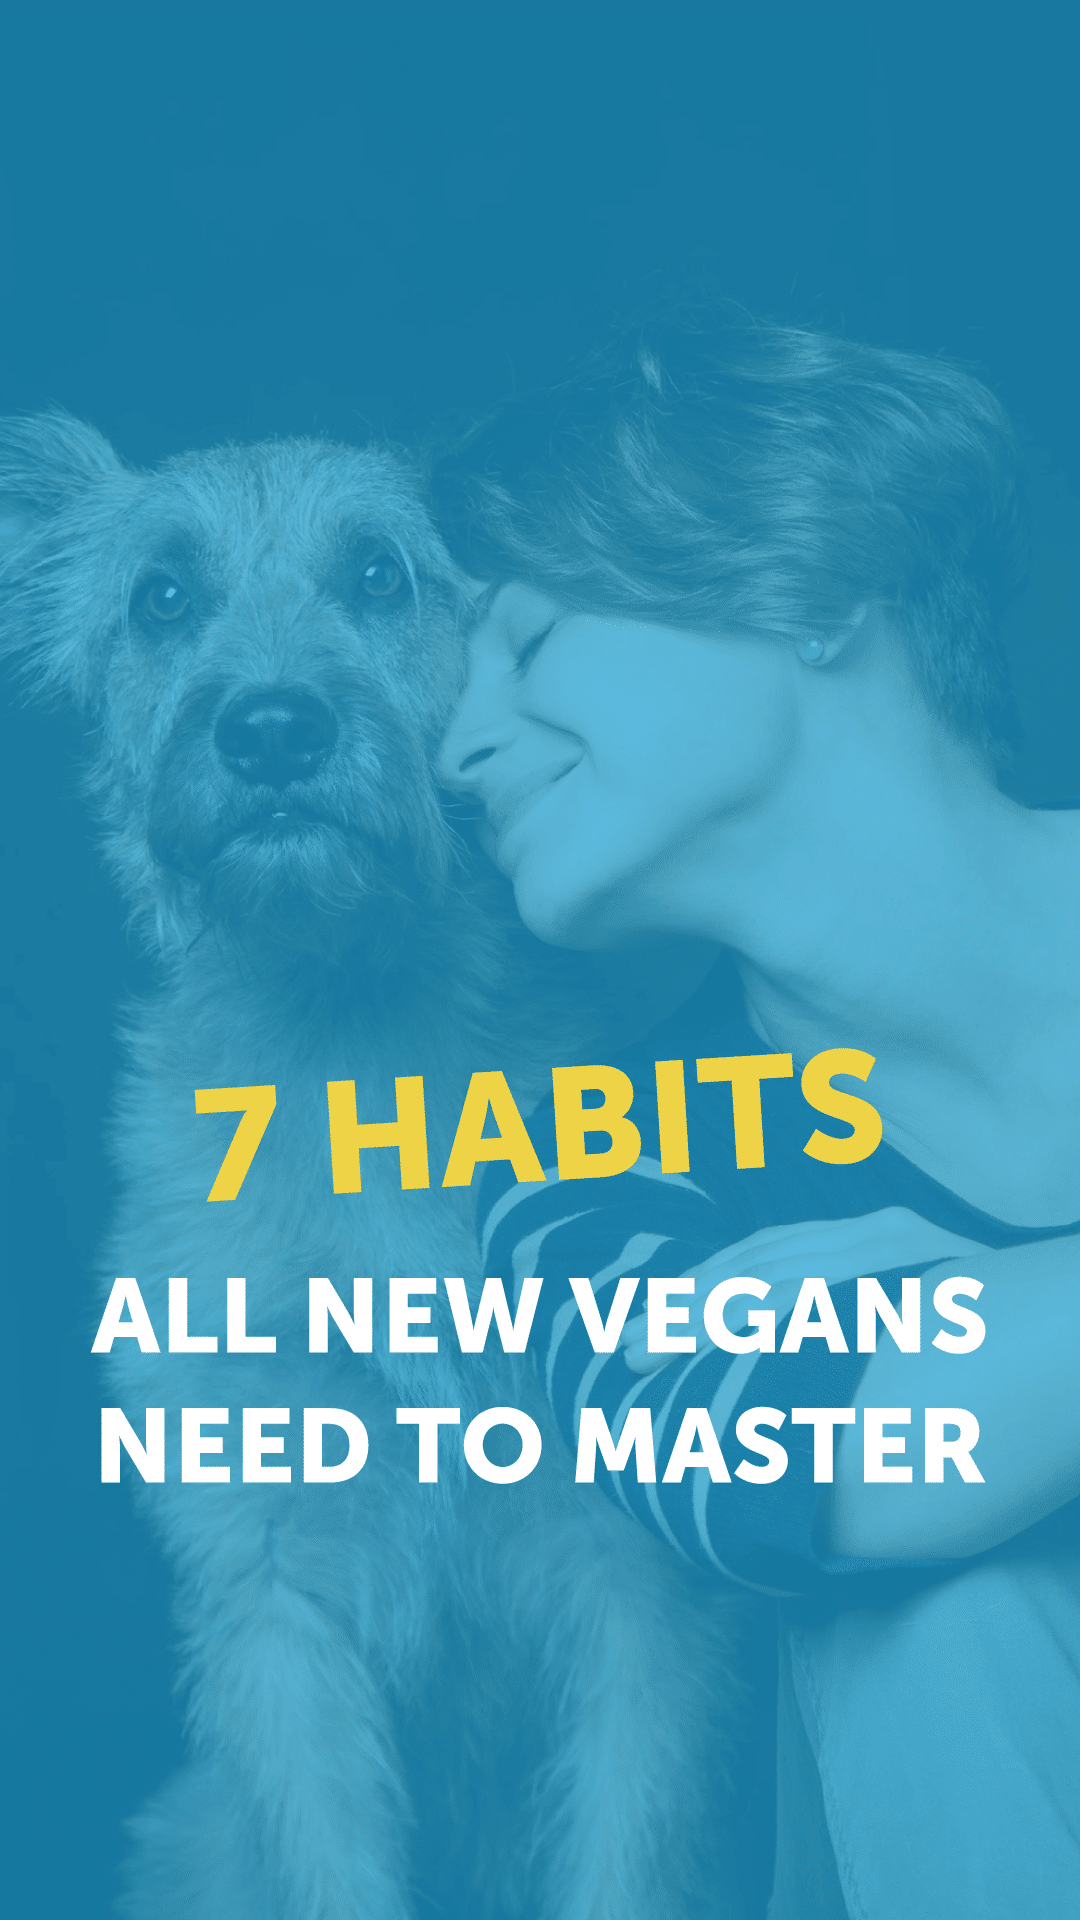 The 7 Habits All New Vegans Need to Master